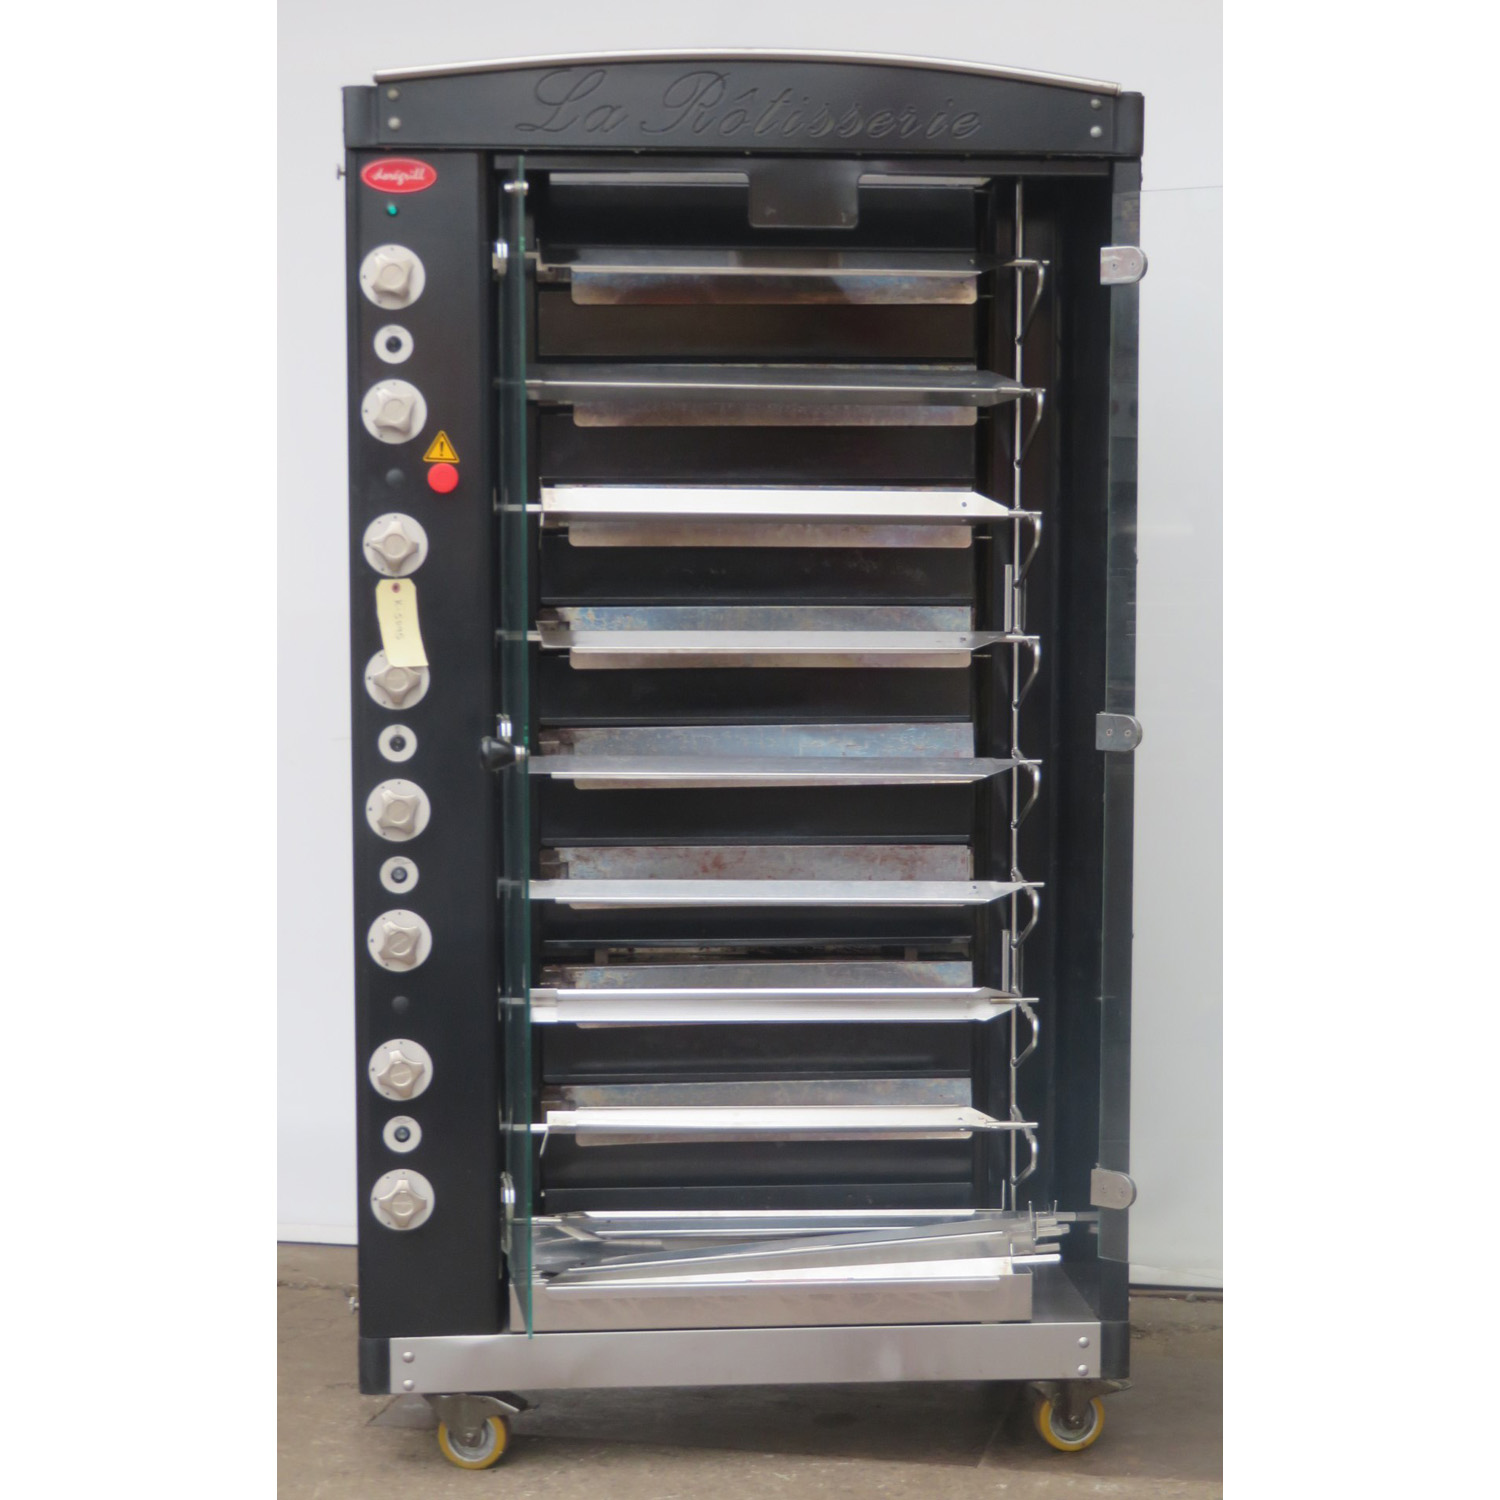 Doregrill MAG-8-GAS Rotisserie 8 Spit, Used Great Condition image 3